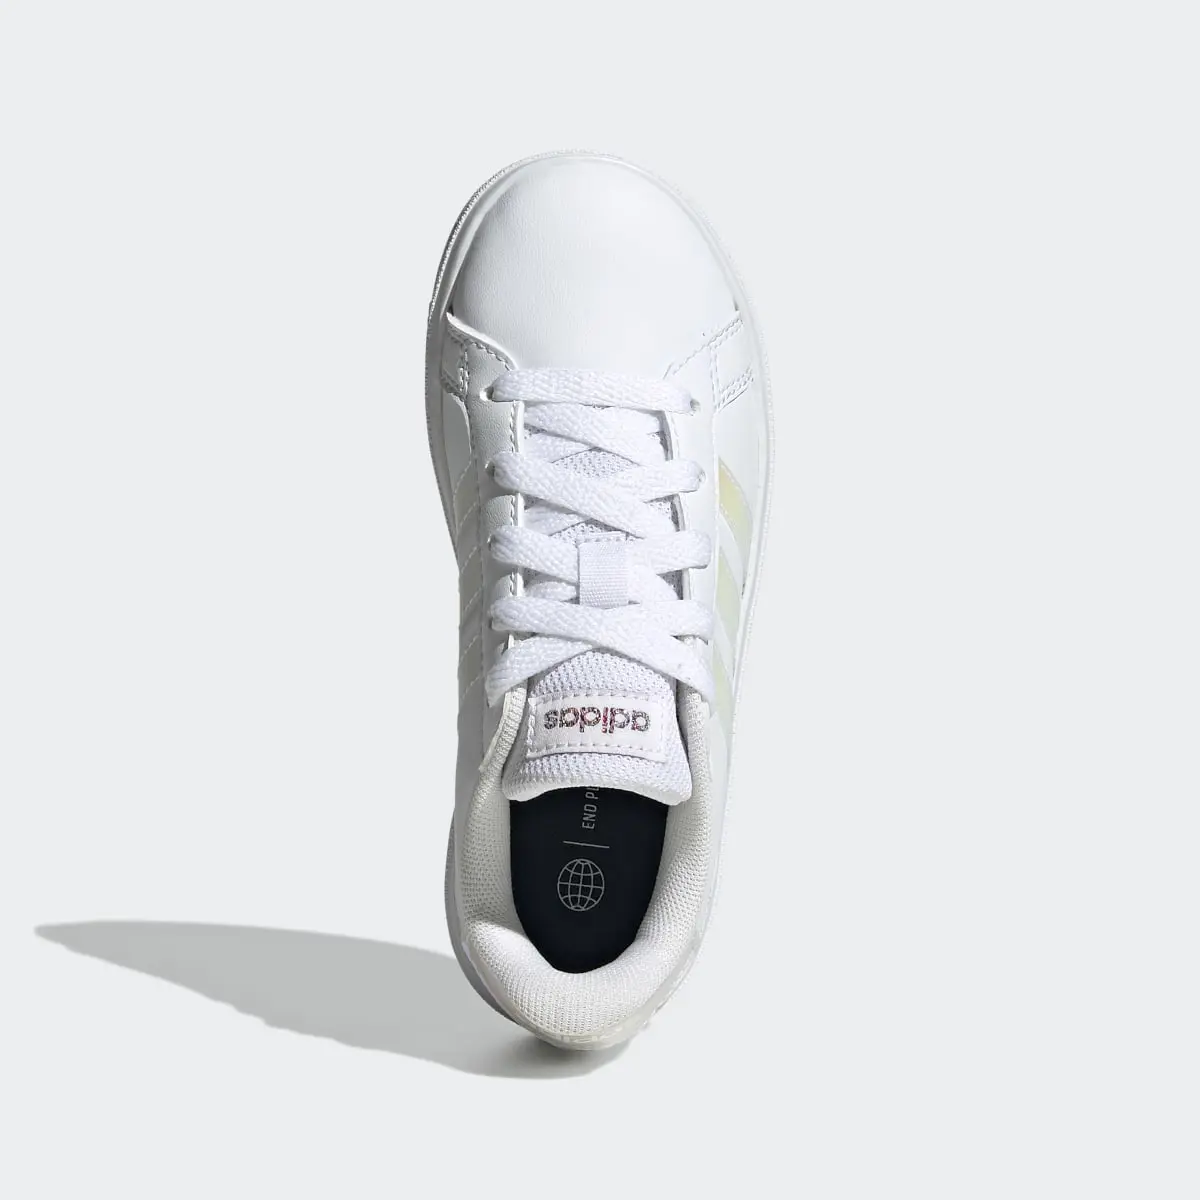 Adidas Buty Grand Court Lifestyle Lace Tennis. 3